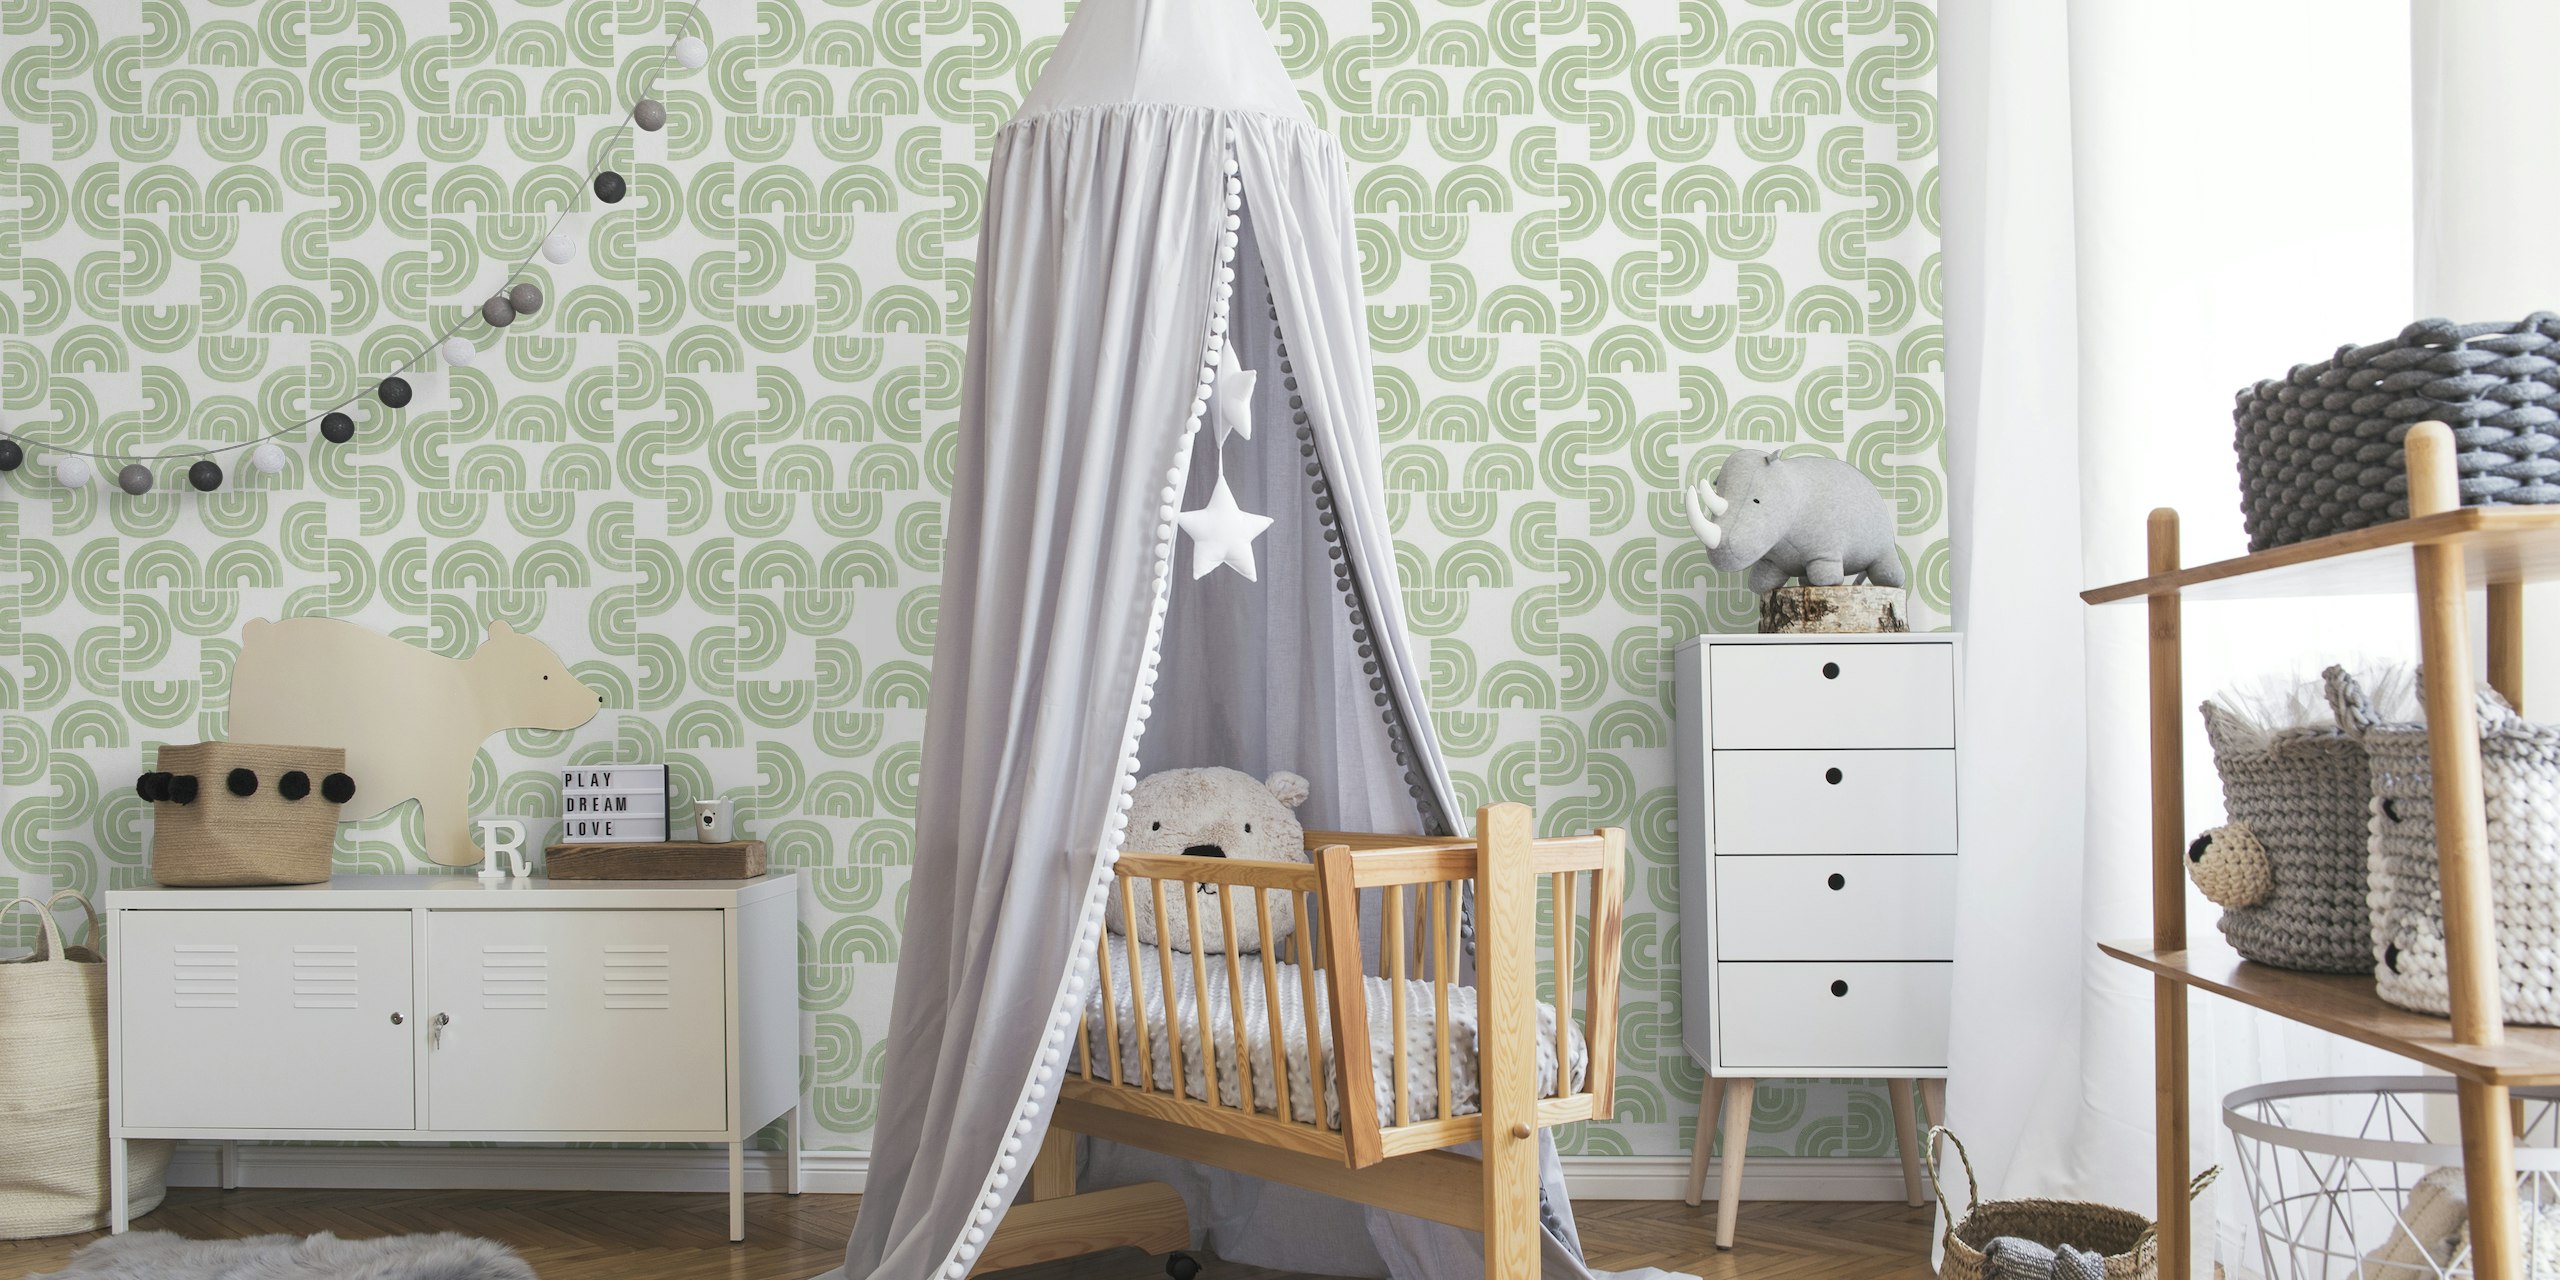 Bohemian arches pattern in celadon green on cream wall mural